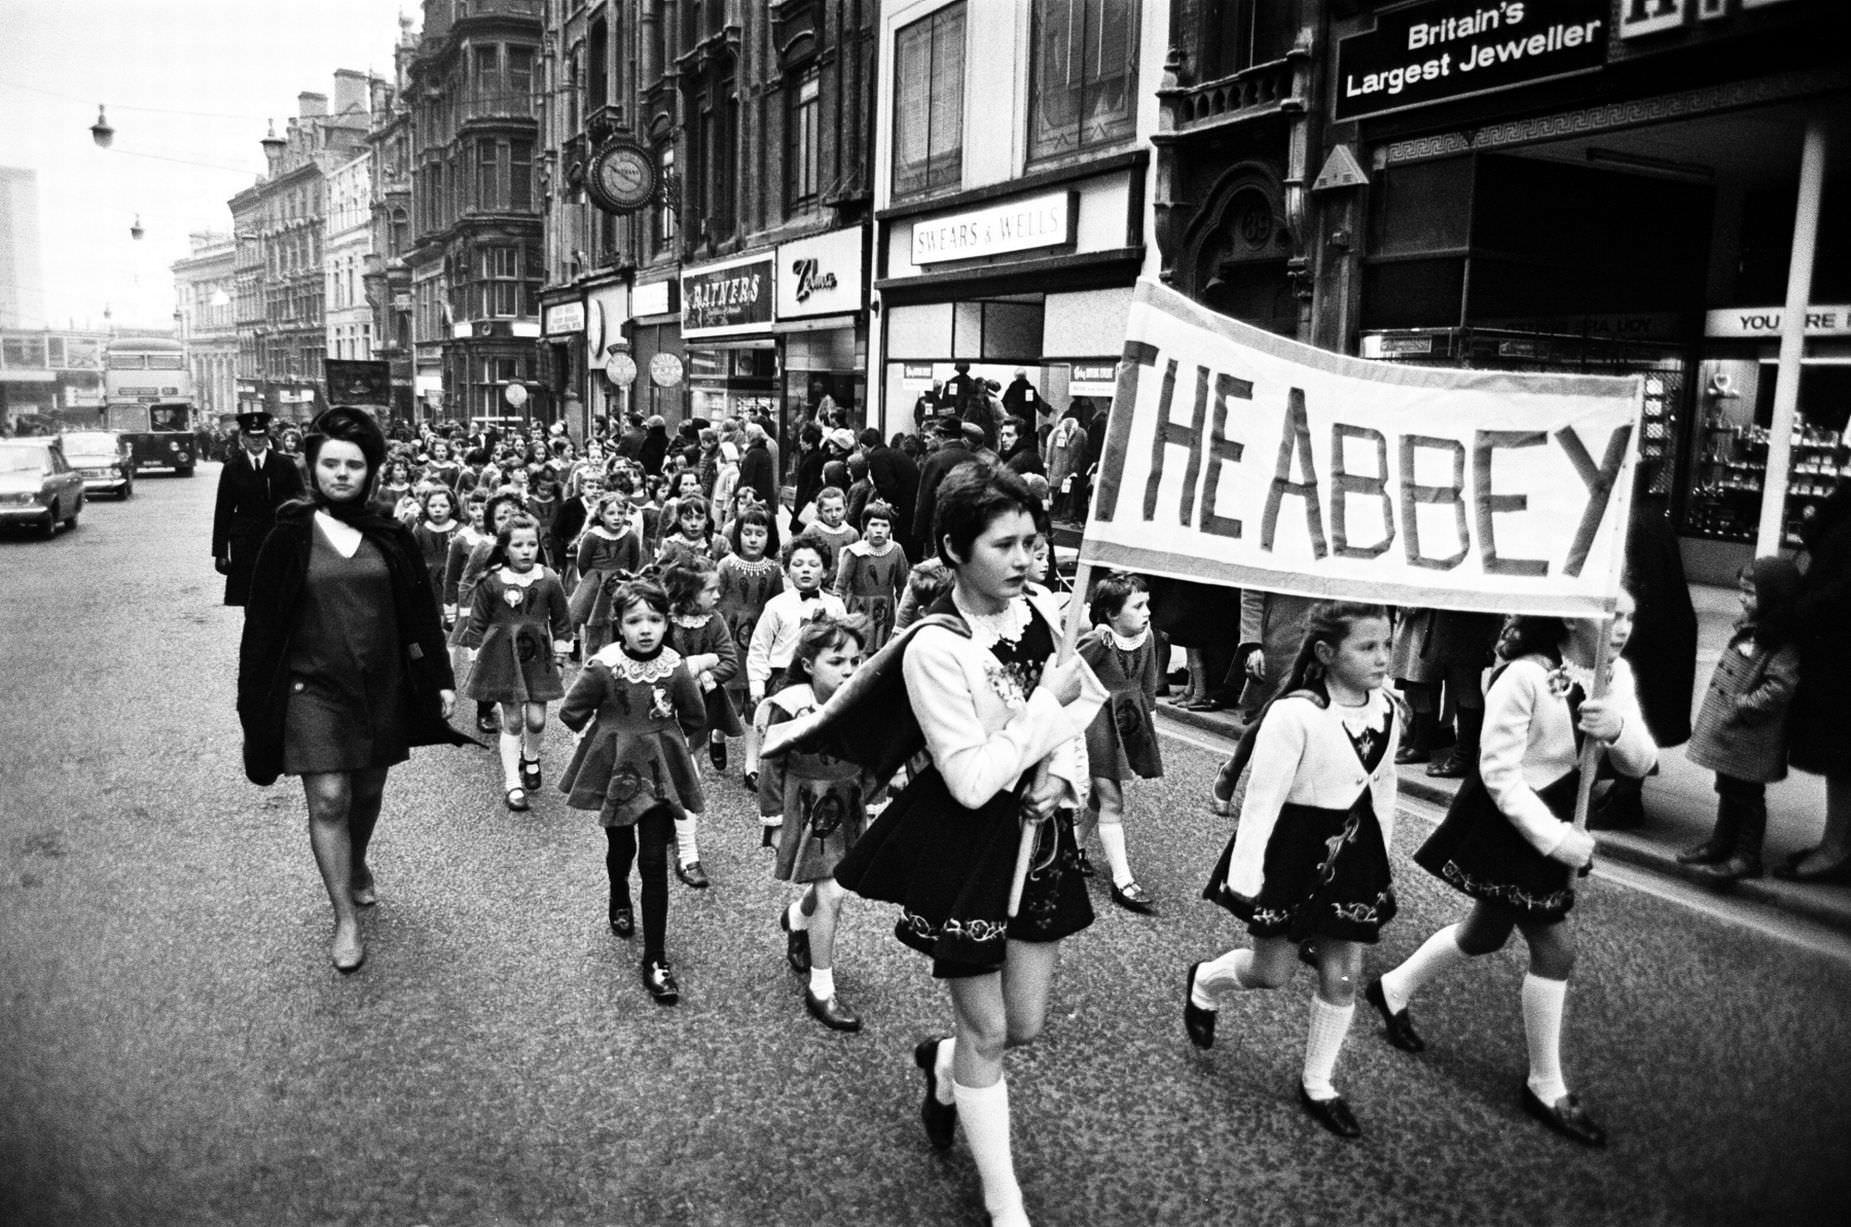 St Patrick's Day March in Birmingham, 16th March 1969.